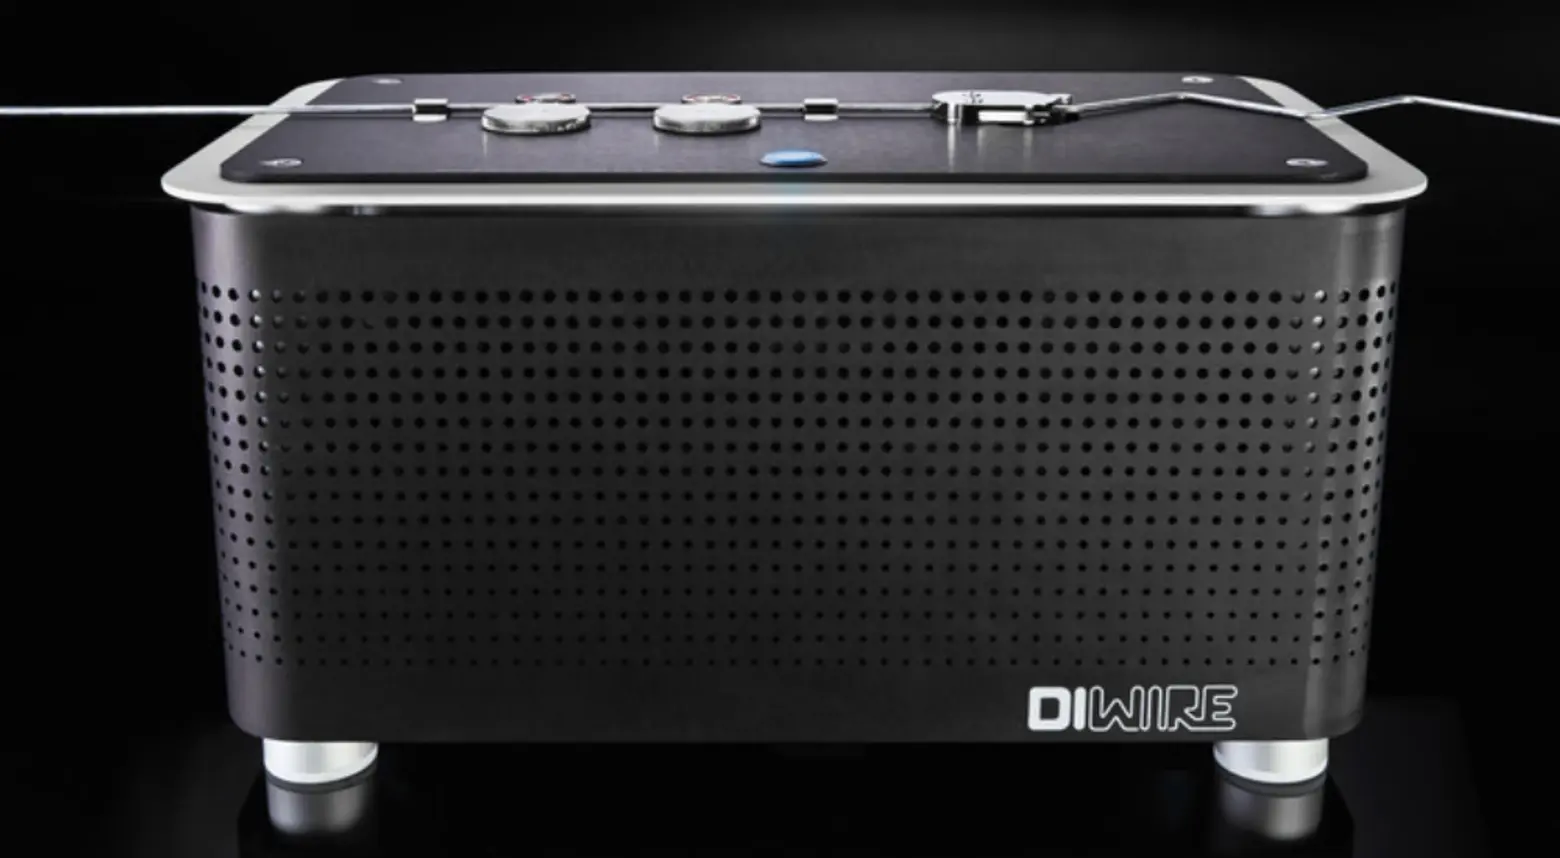 DIWire designed by Pensa Labs